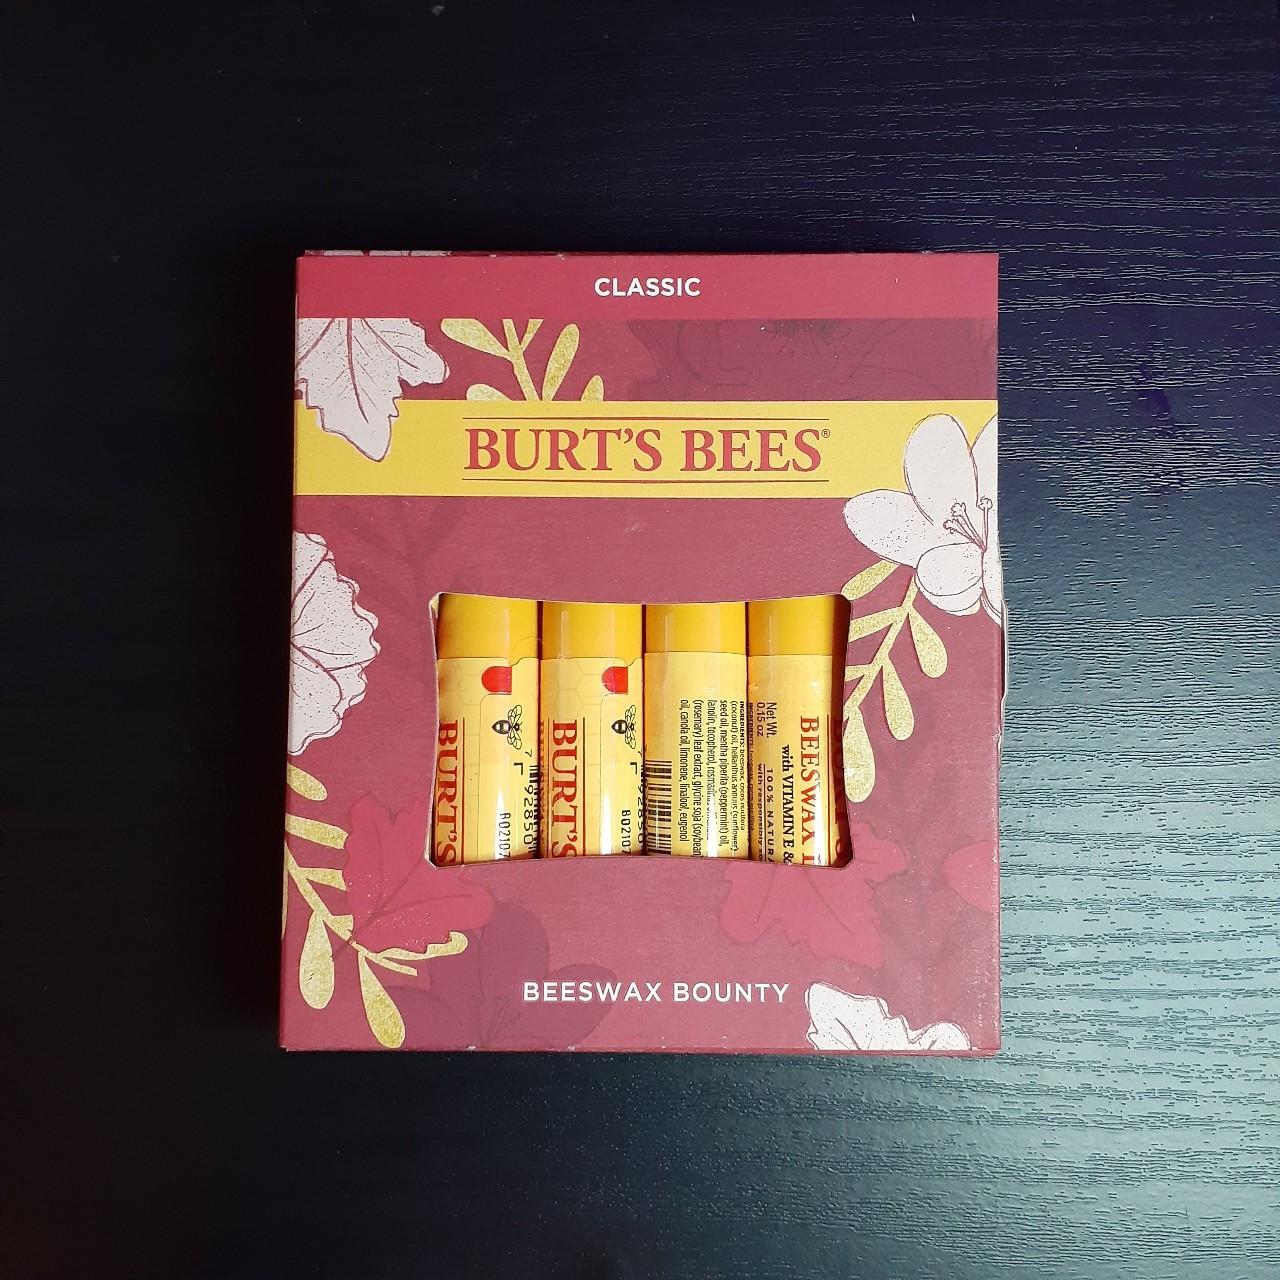 Burt's Bees Yellow and Red Bath-and-body